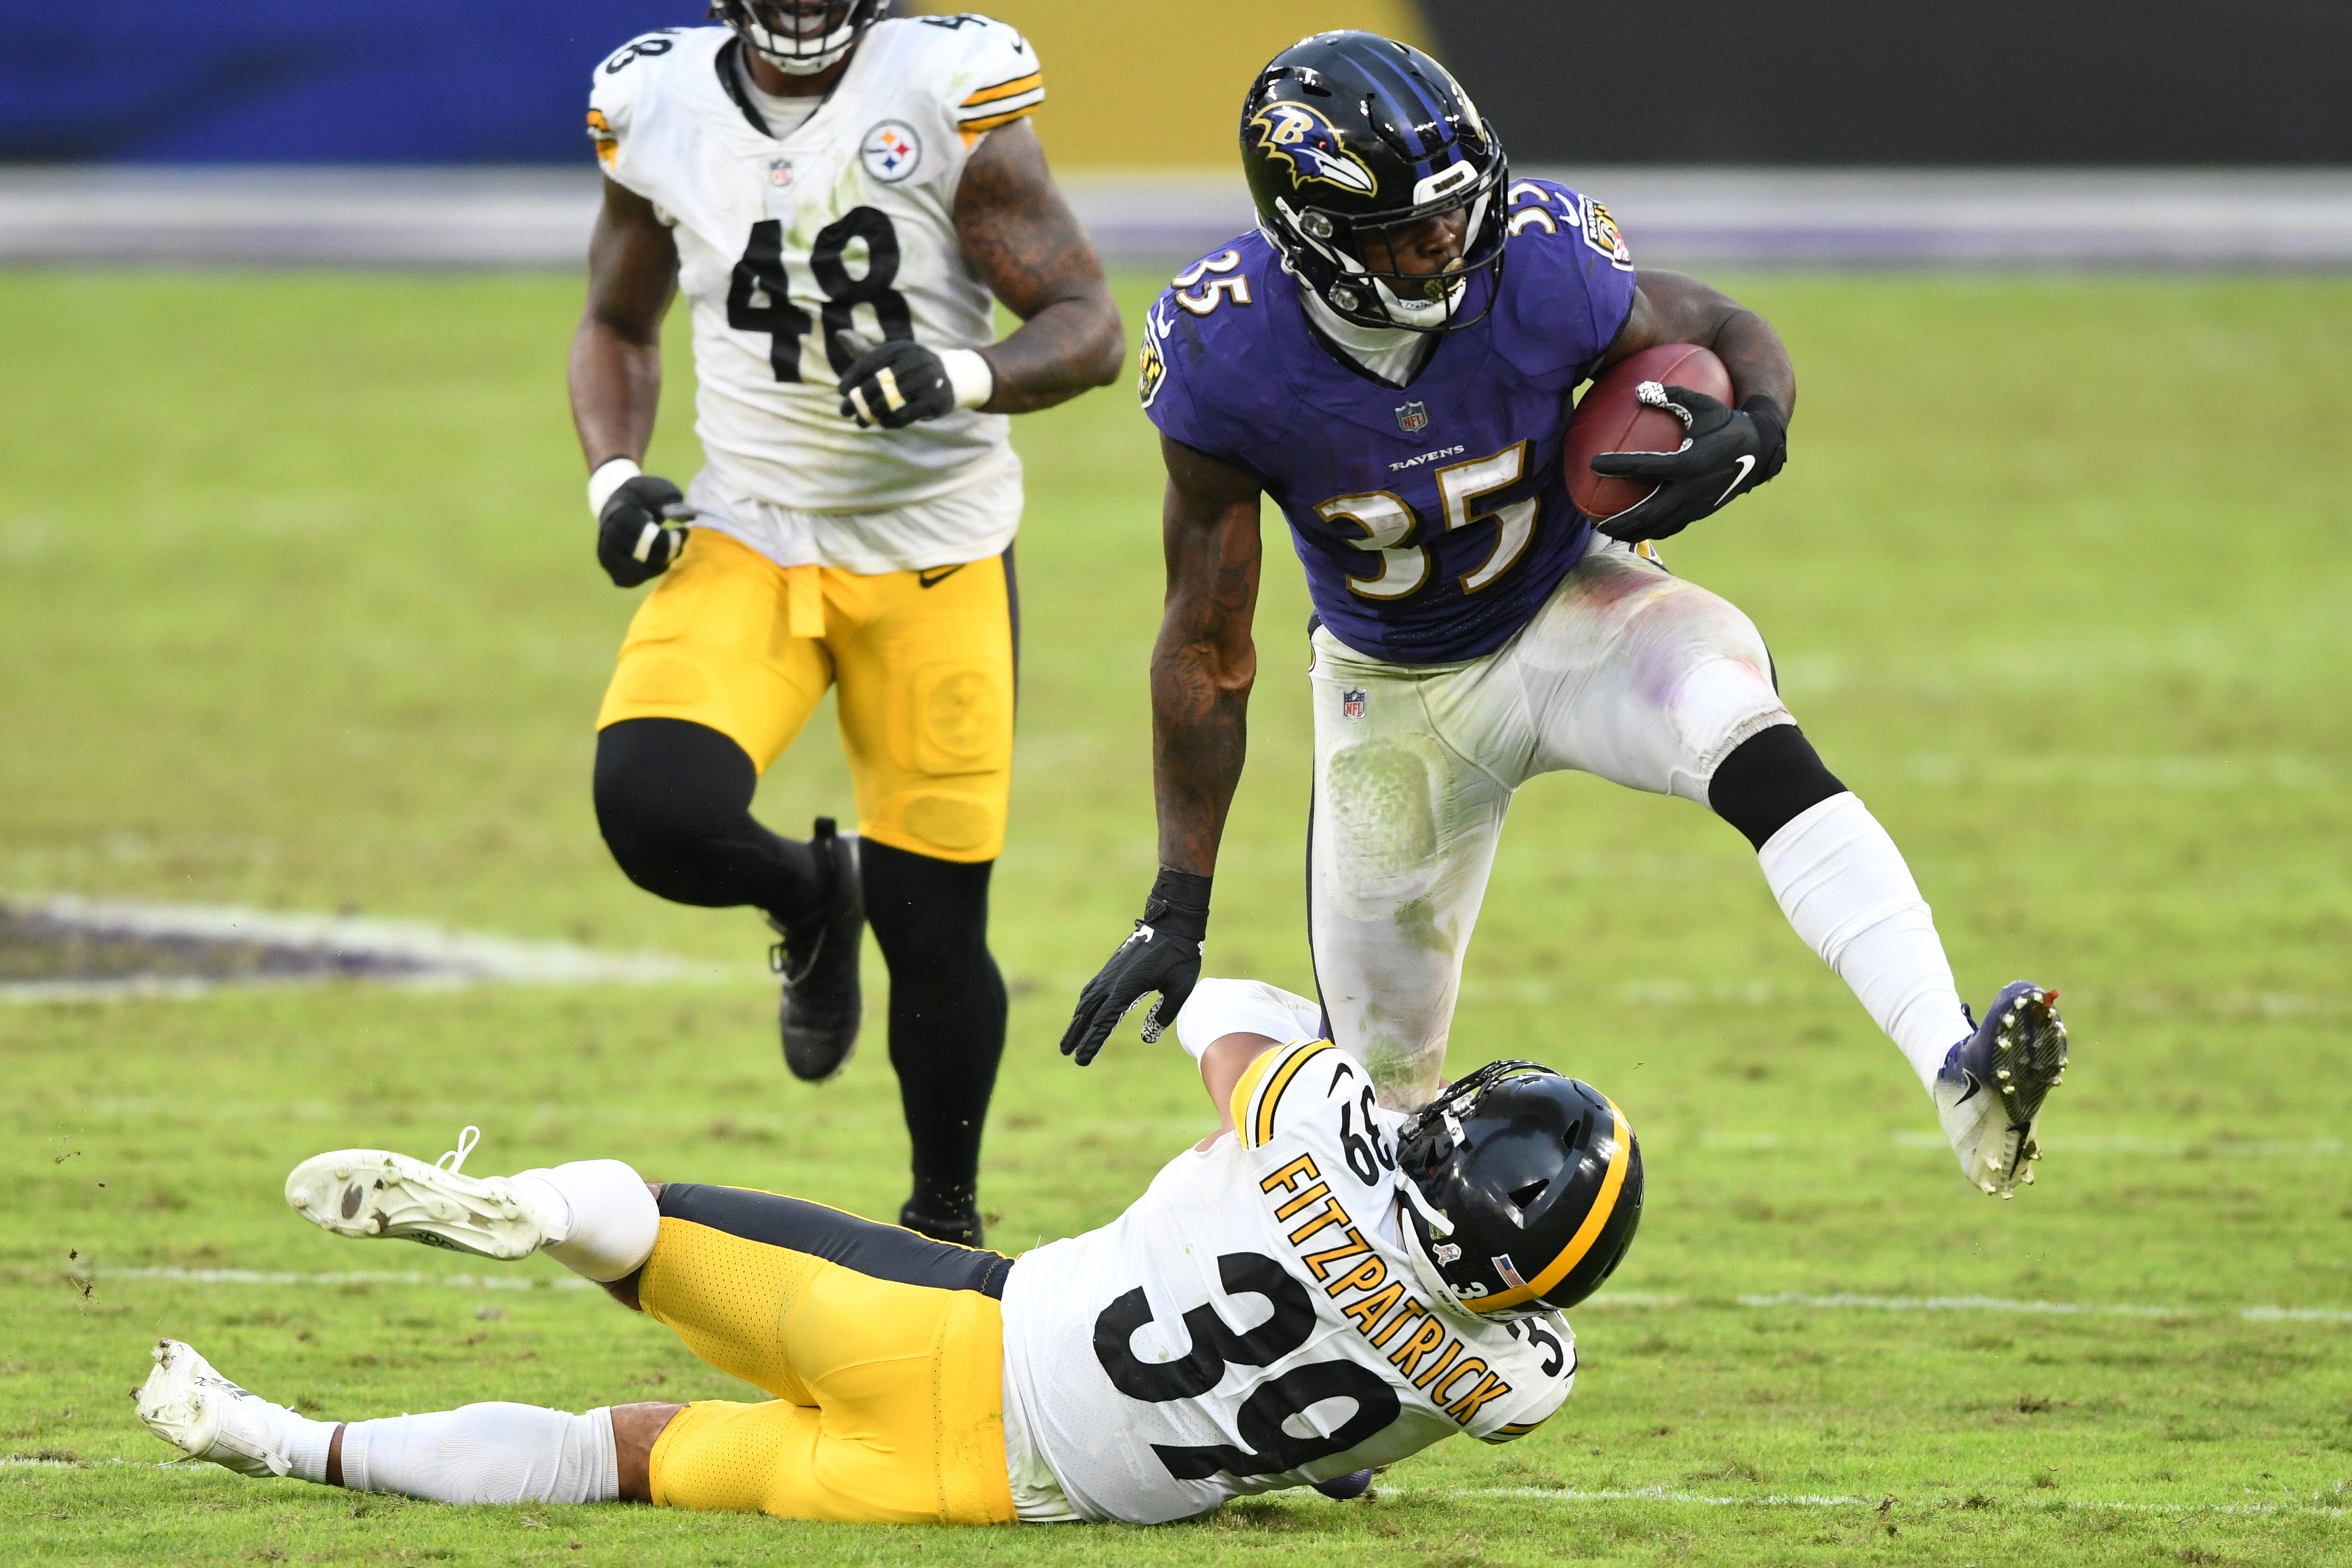 Ravens-Steelers updates: Game officially on, no new positive tests for Baltimore, per reports